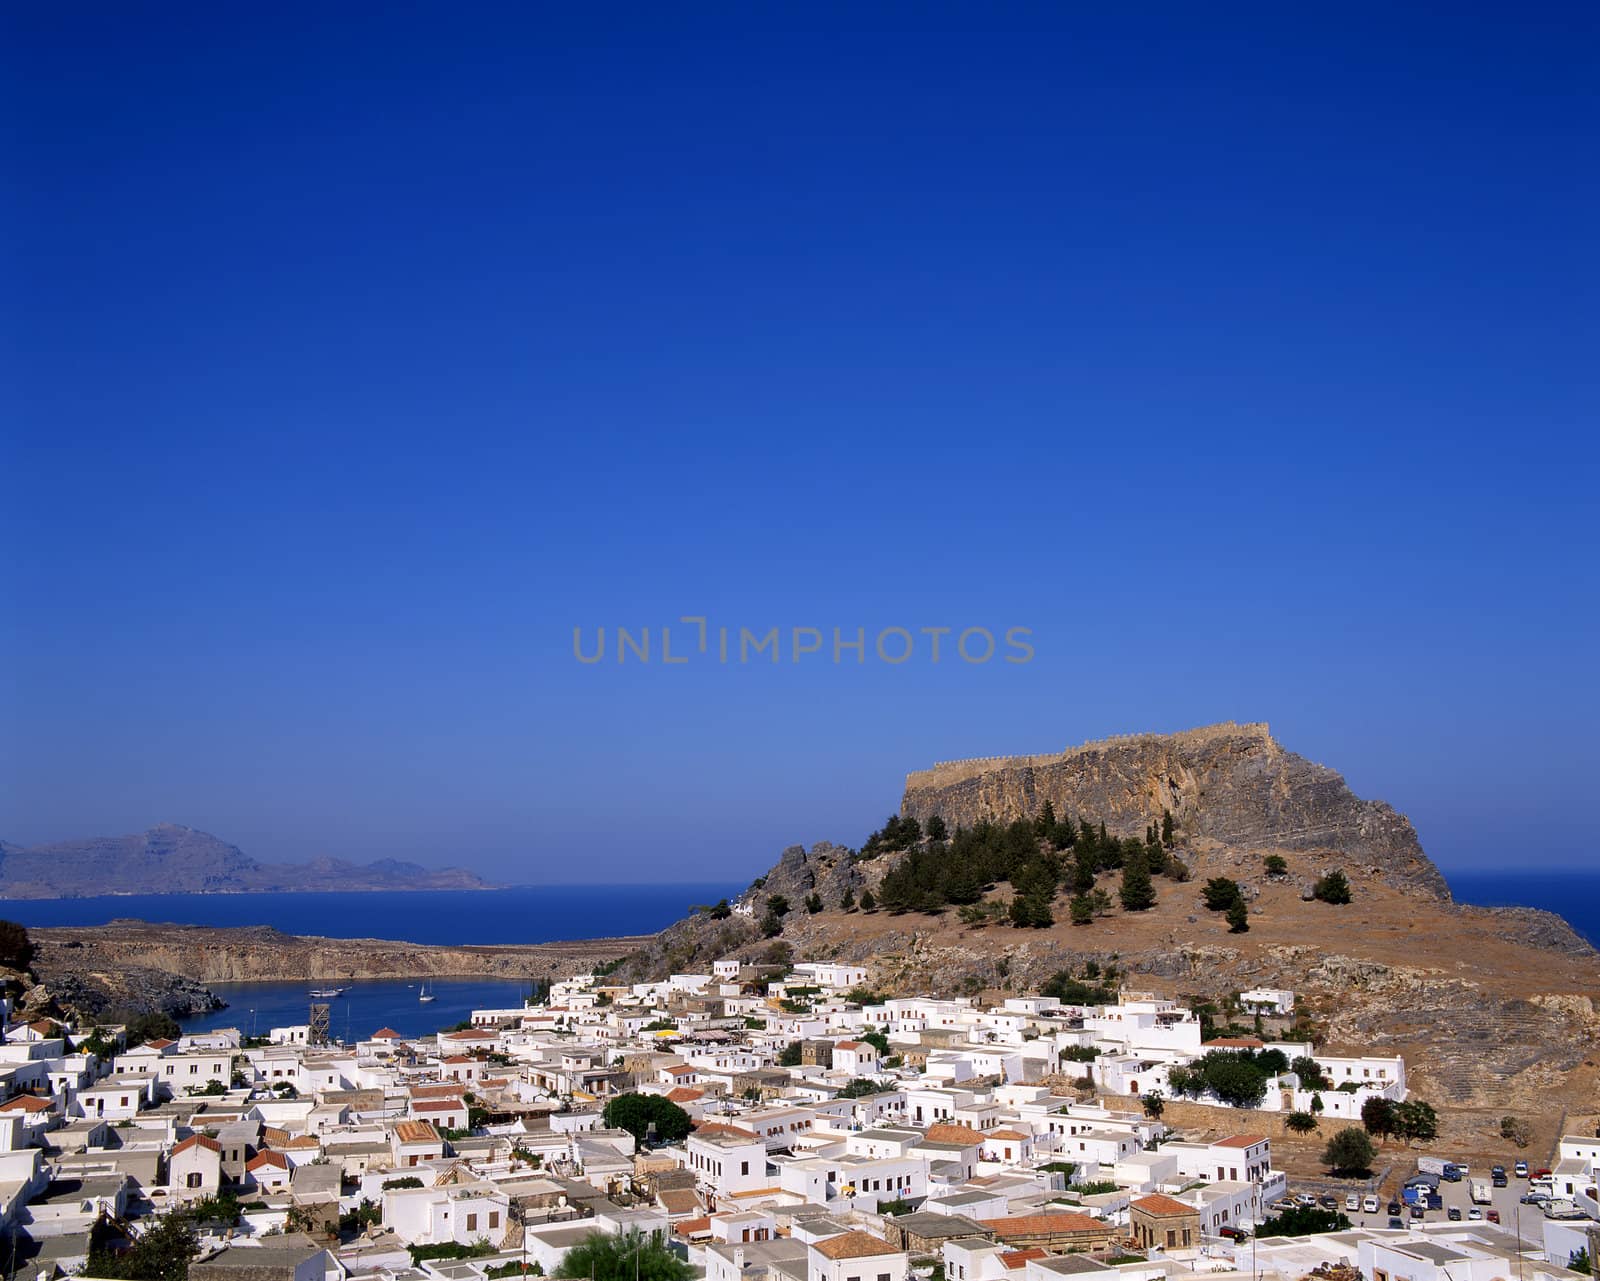 View looking over the town of Lindos, Rhodes, Greece with the castle in the background.